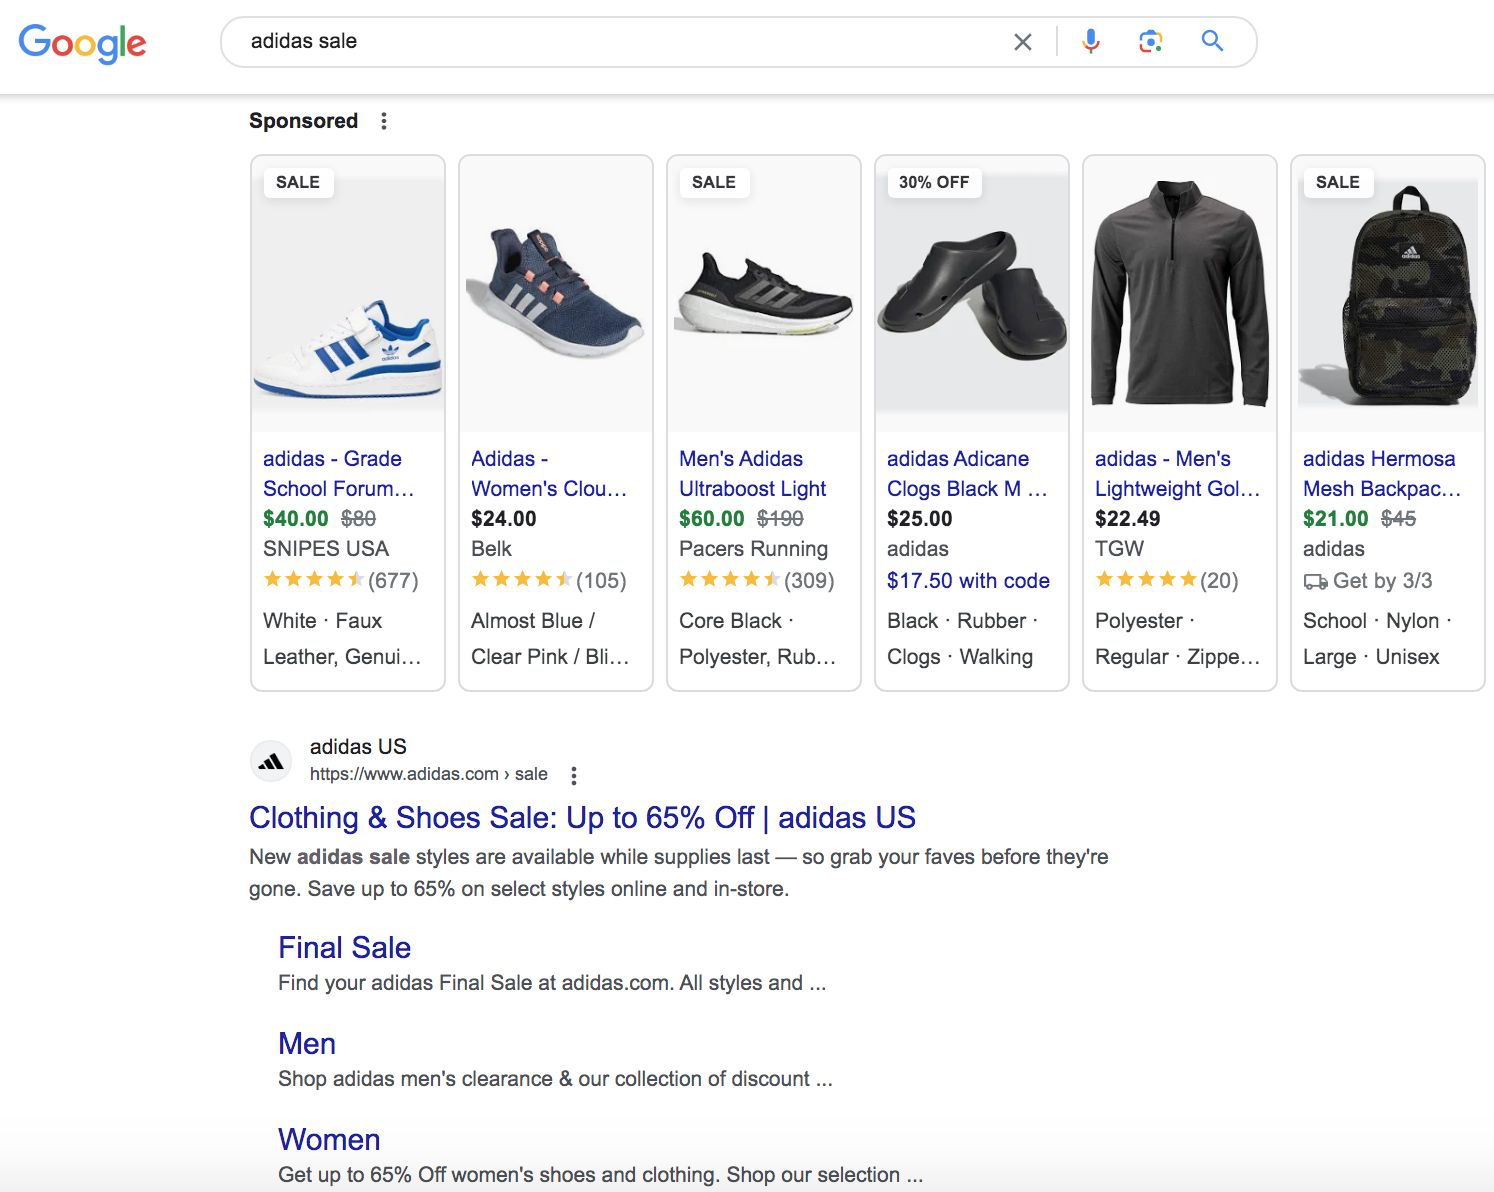 Top of Google's SERP for "adidas" merchantability  query features PLA ads and Adidas' website